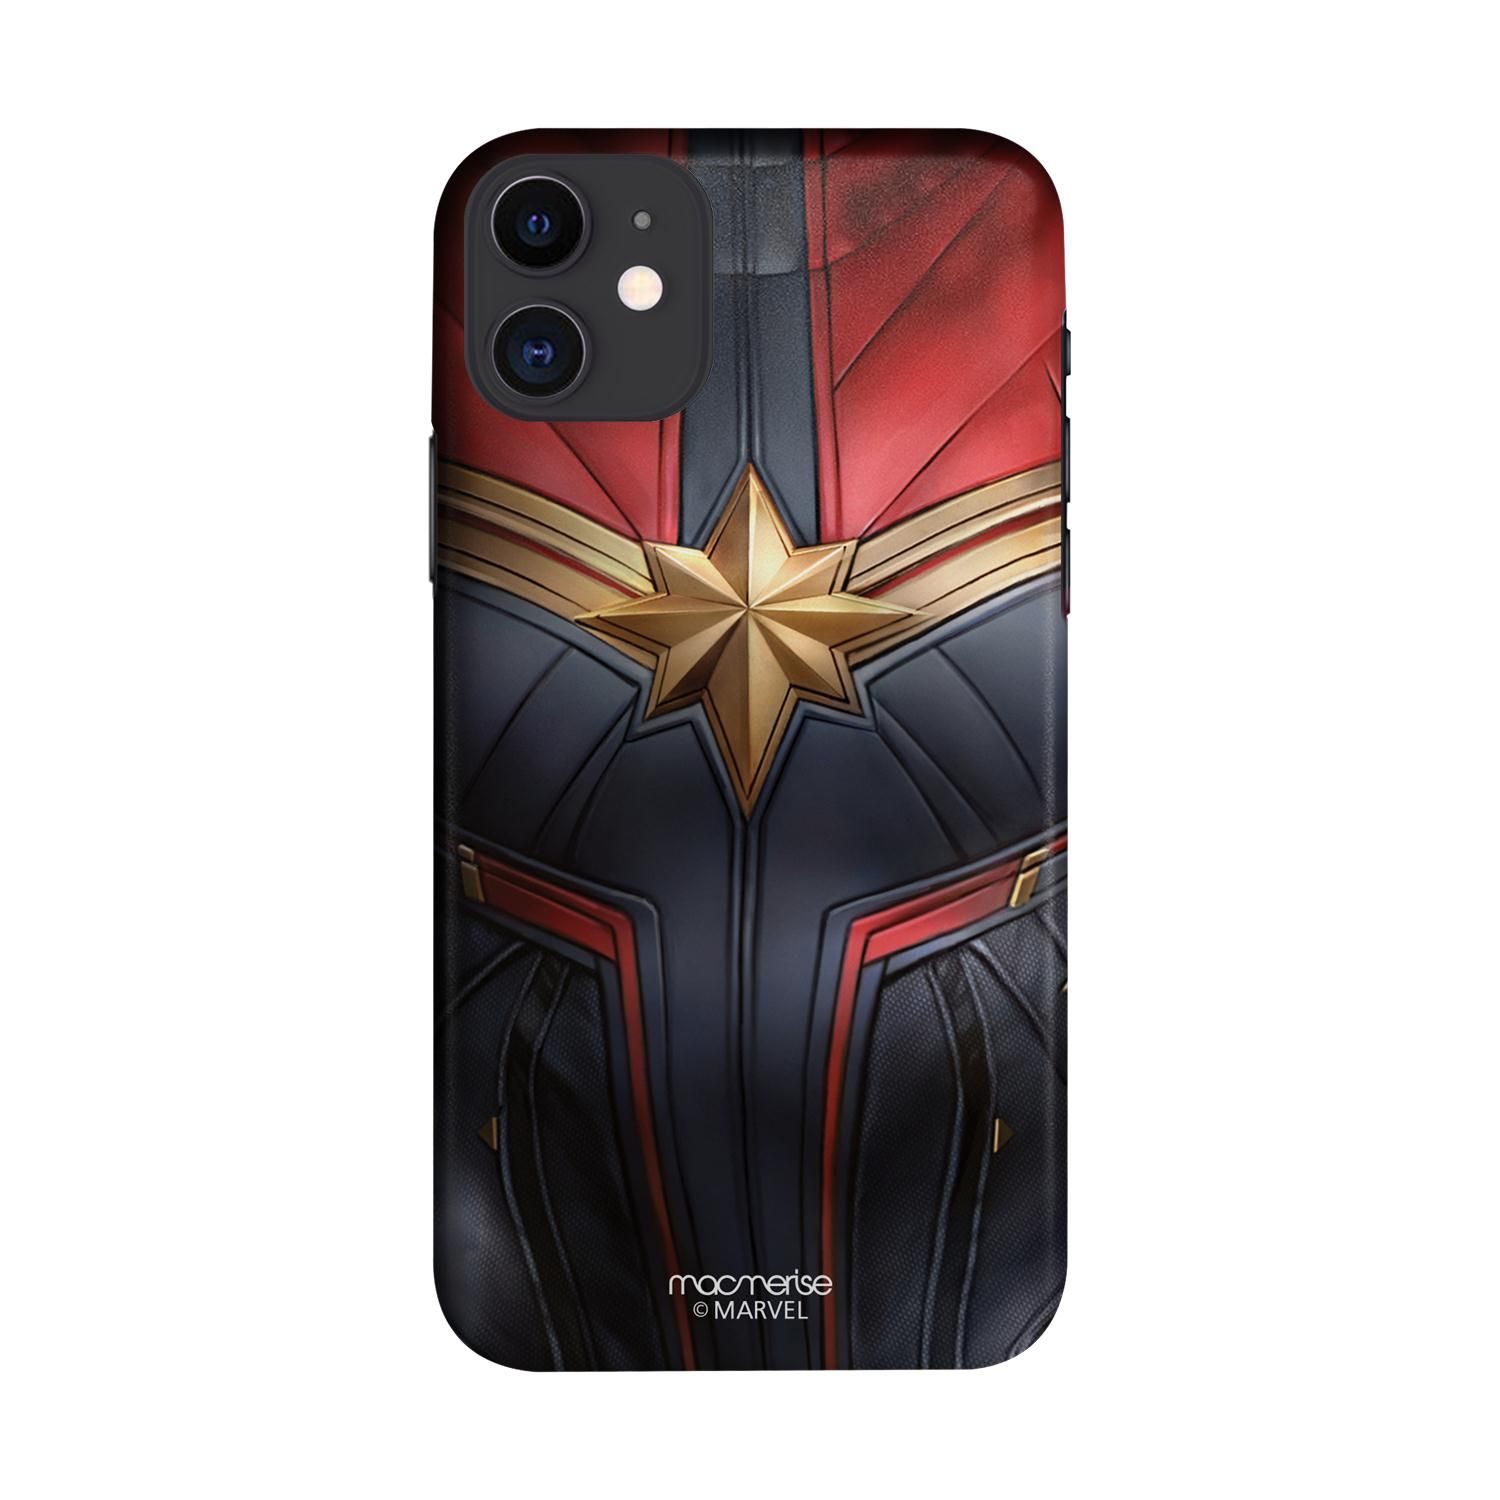 Suit up Captain Marvel - Sleek Phone Case for iPhone 11